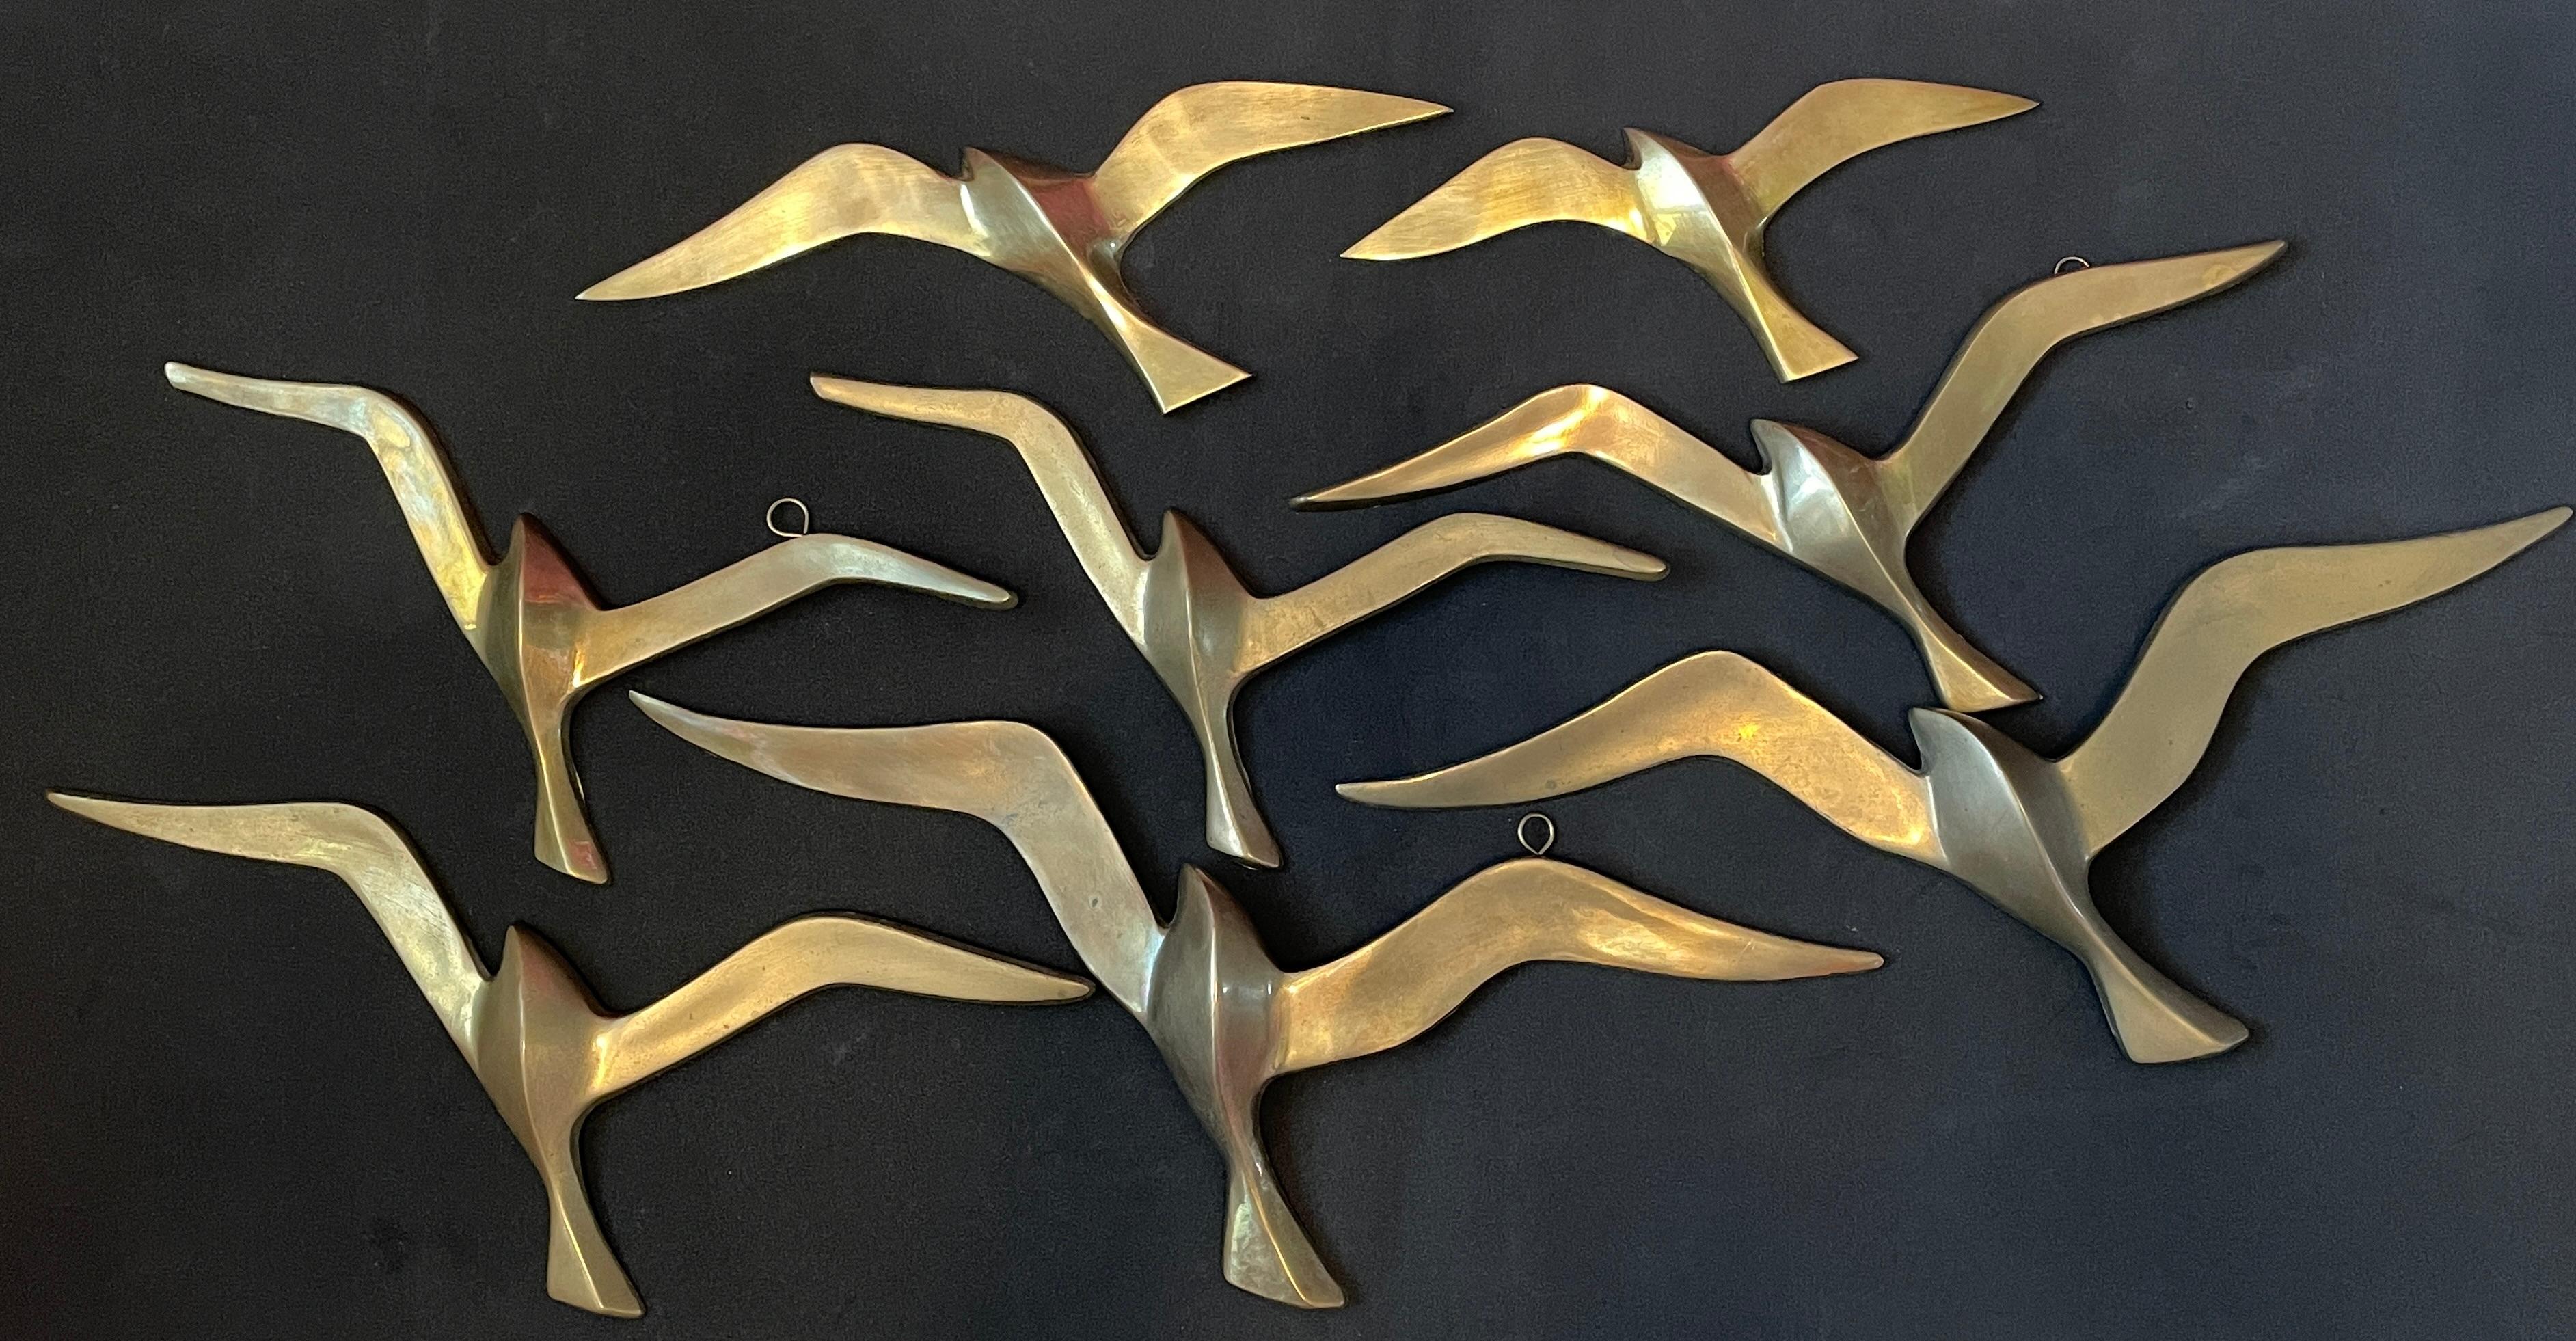 A set of eight beautiful vintage brass flying swallow wall decorations. Each would make a beautiful ornament on a wall. They are with some patina and are an excellent craftsmanship. Made in the 1960s it displays the joy of that great era with a